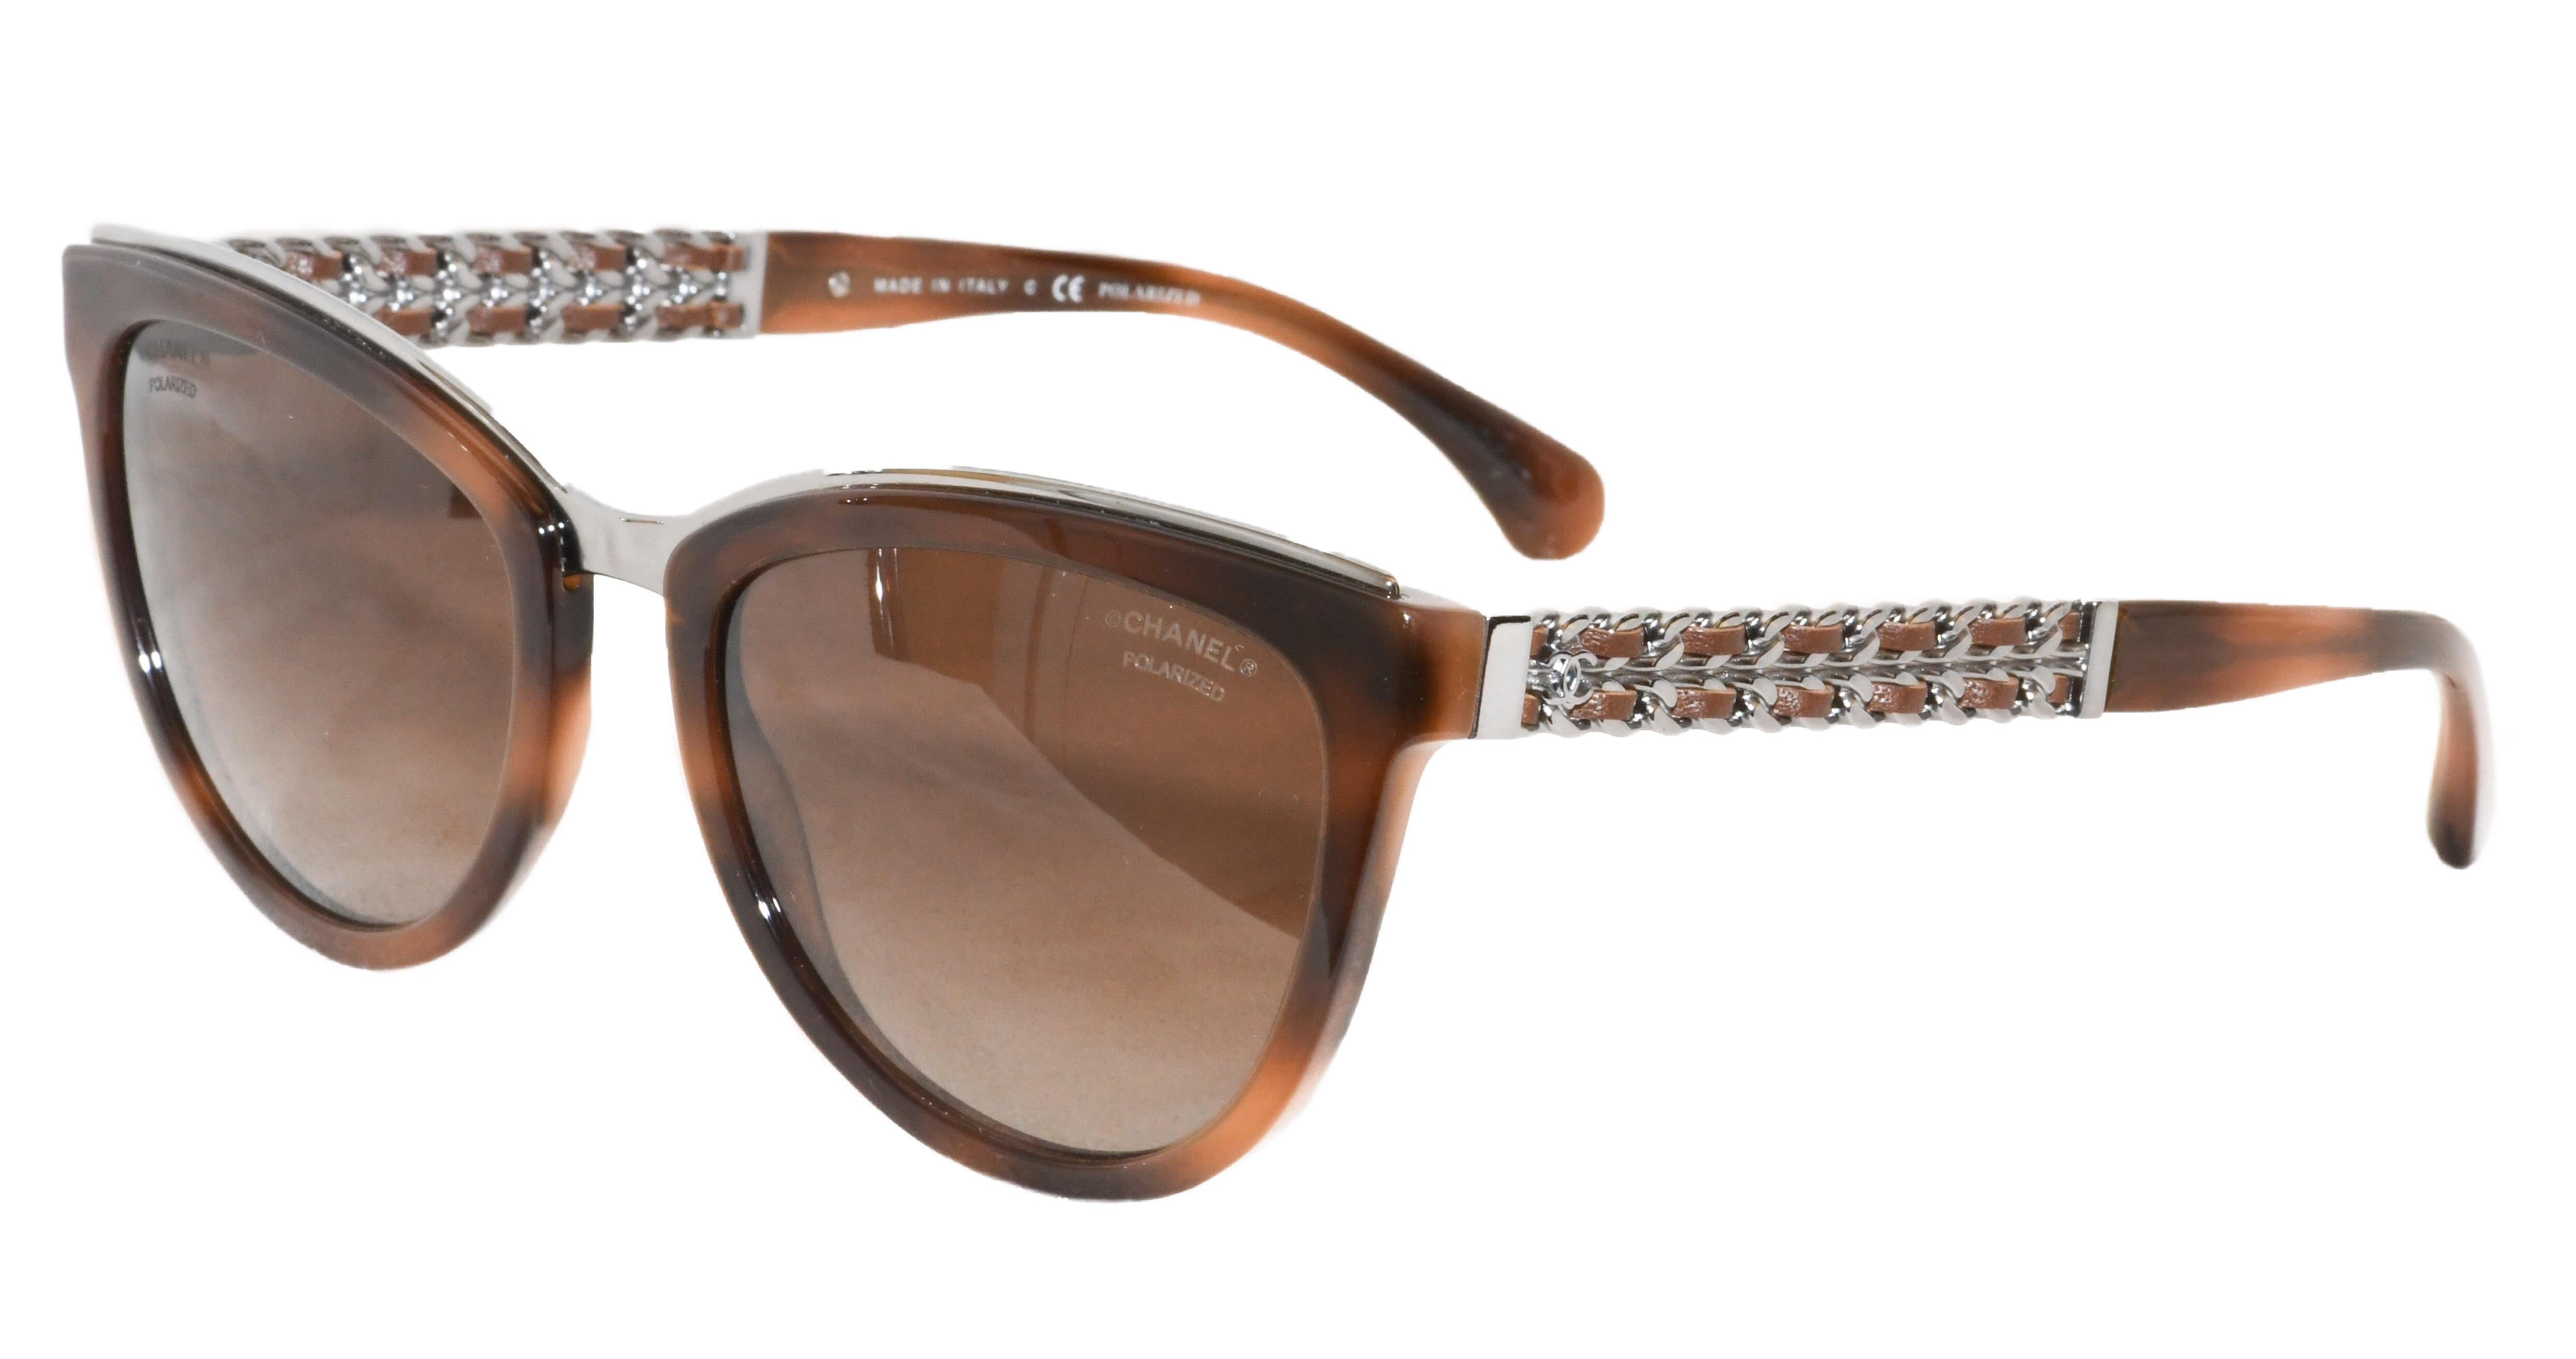 Chanel.  Not much else needs to be said.  These fabulous brand new, never worn cat eye sunglasses are perfection Chanel.  Temple arms sport iconic CC logo and braided chain detail.  Polarized lenses.  Hallmarked 5361-0 Made in Italy.  Warm brown